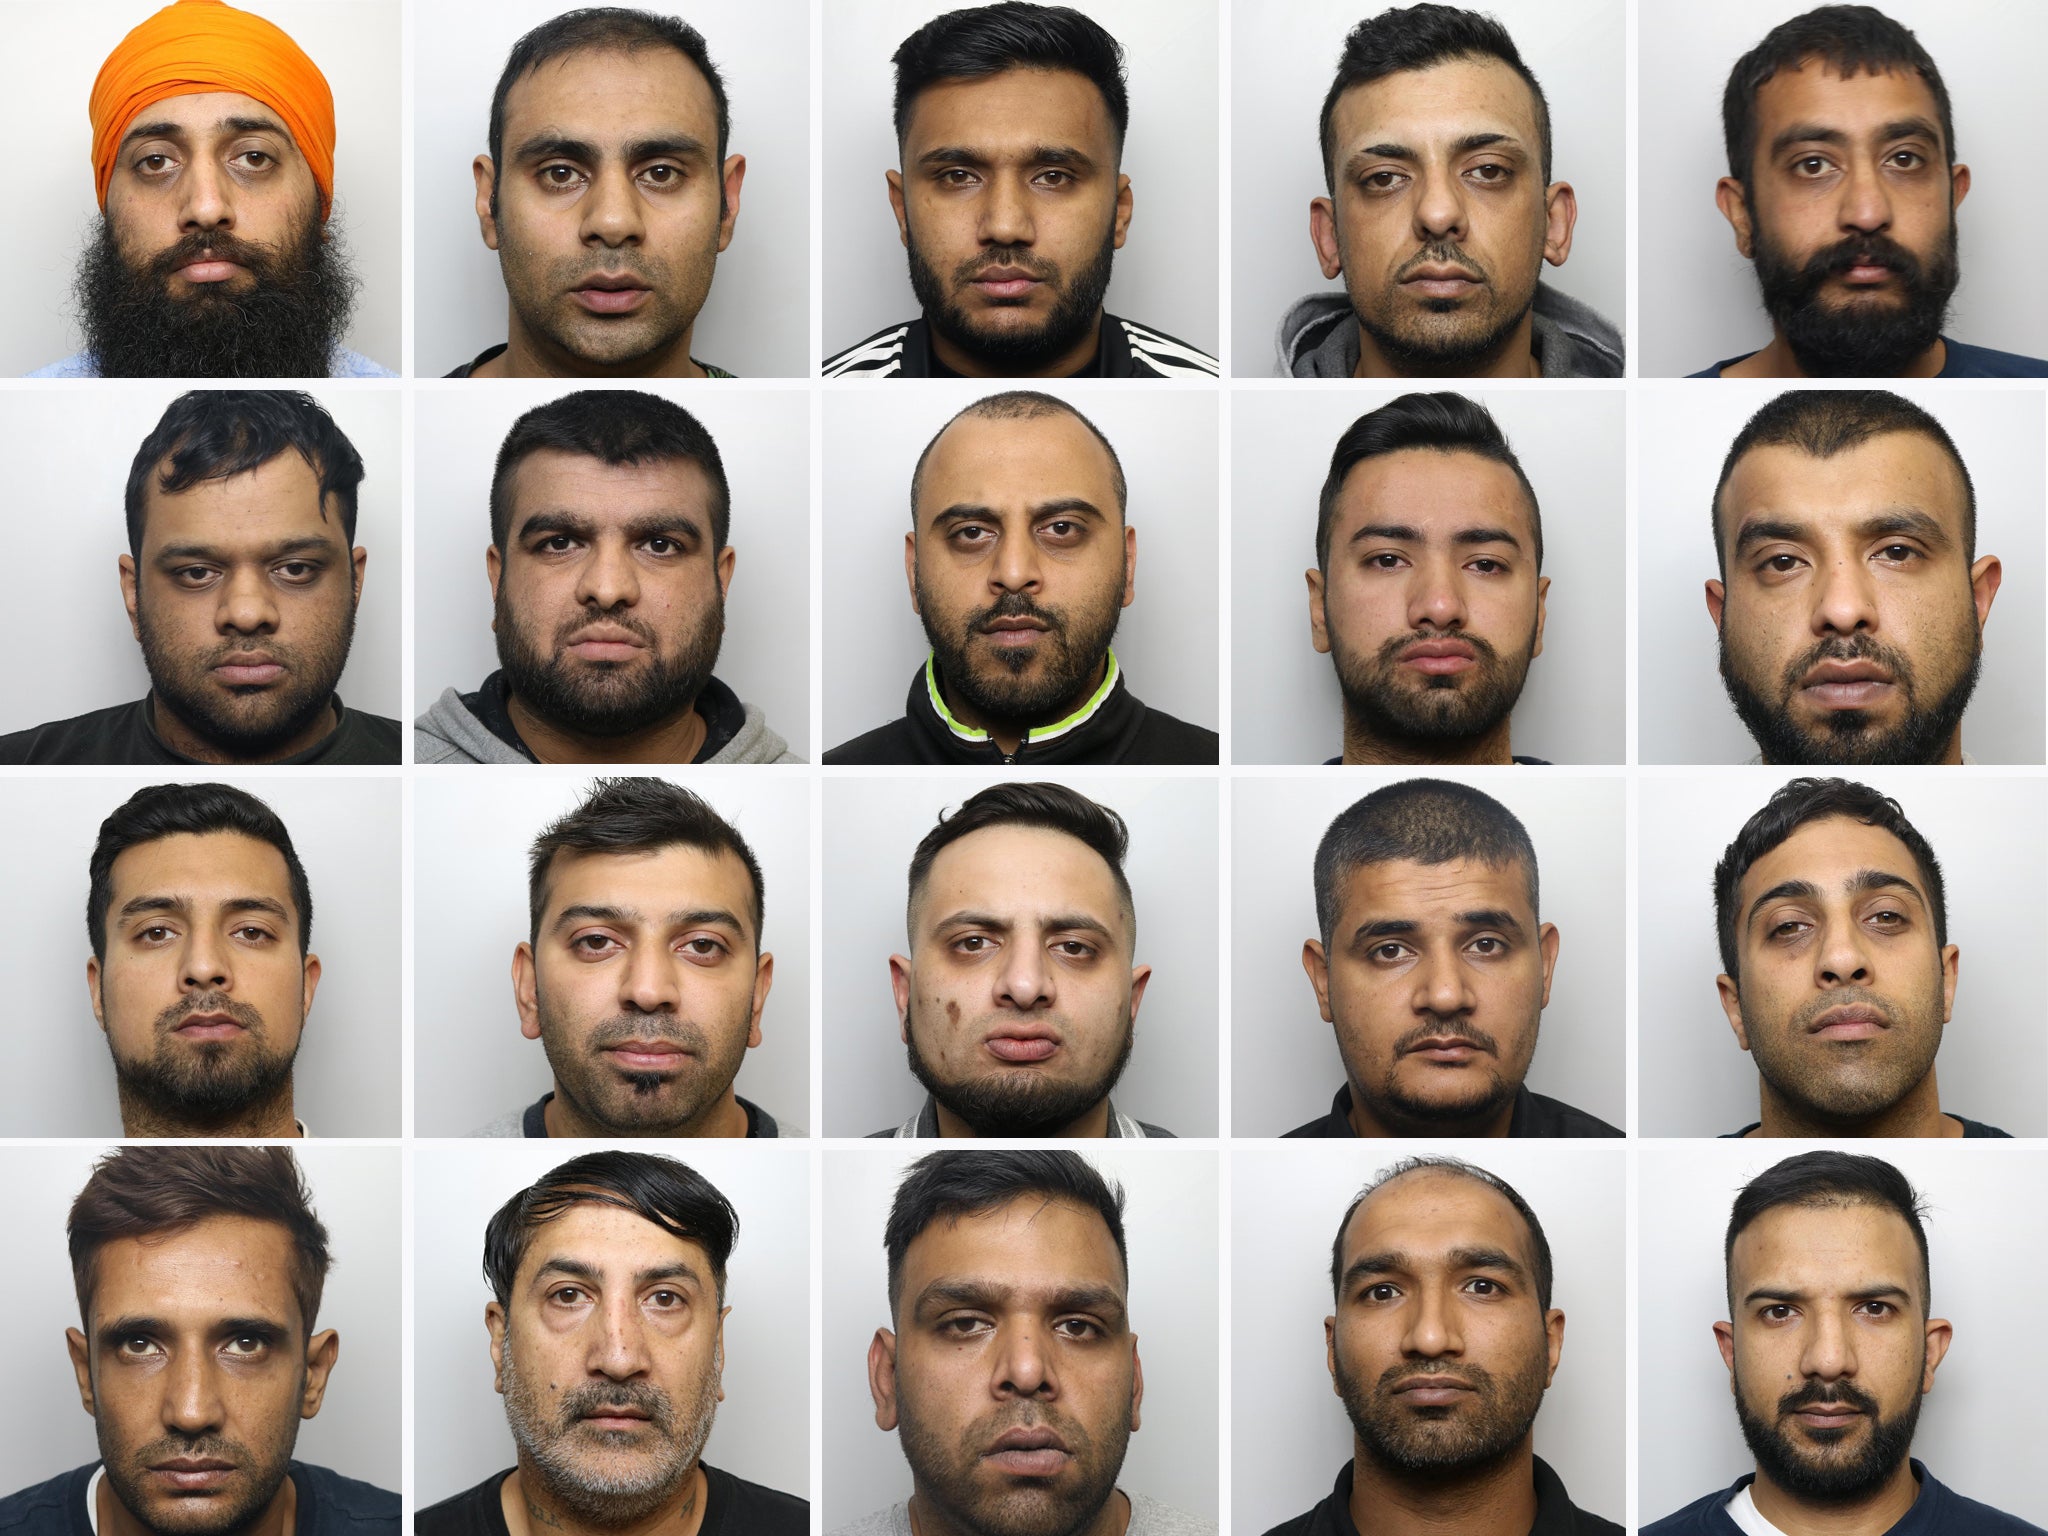 Members of the Huddersfield grooming gang were later convicted and jailed